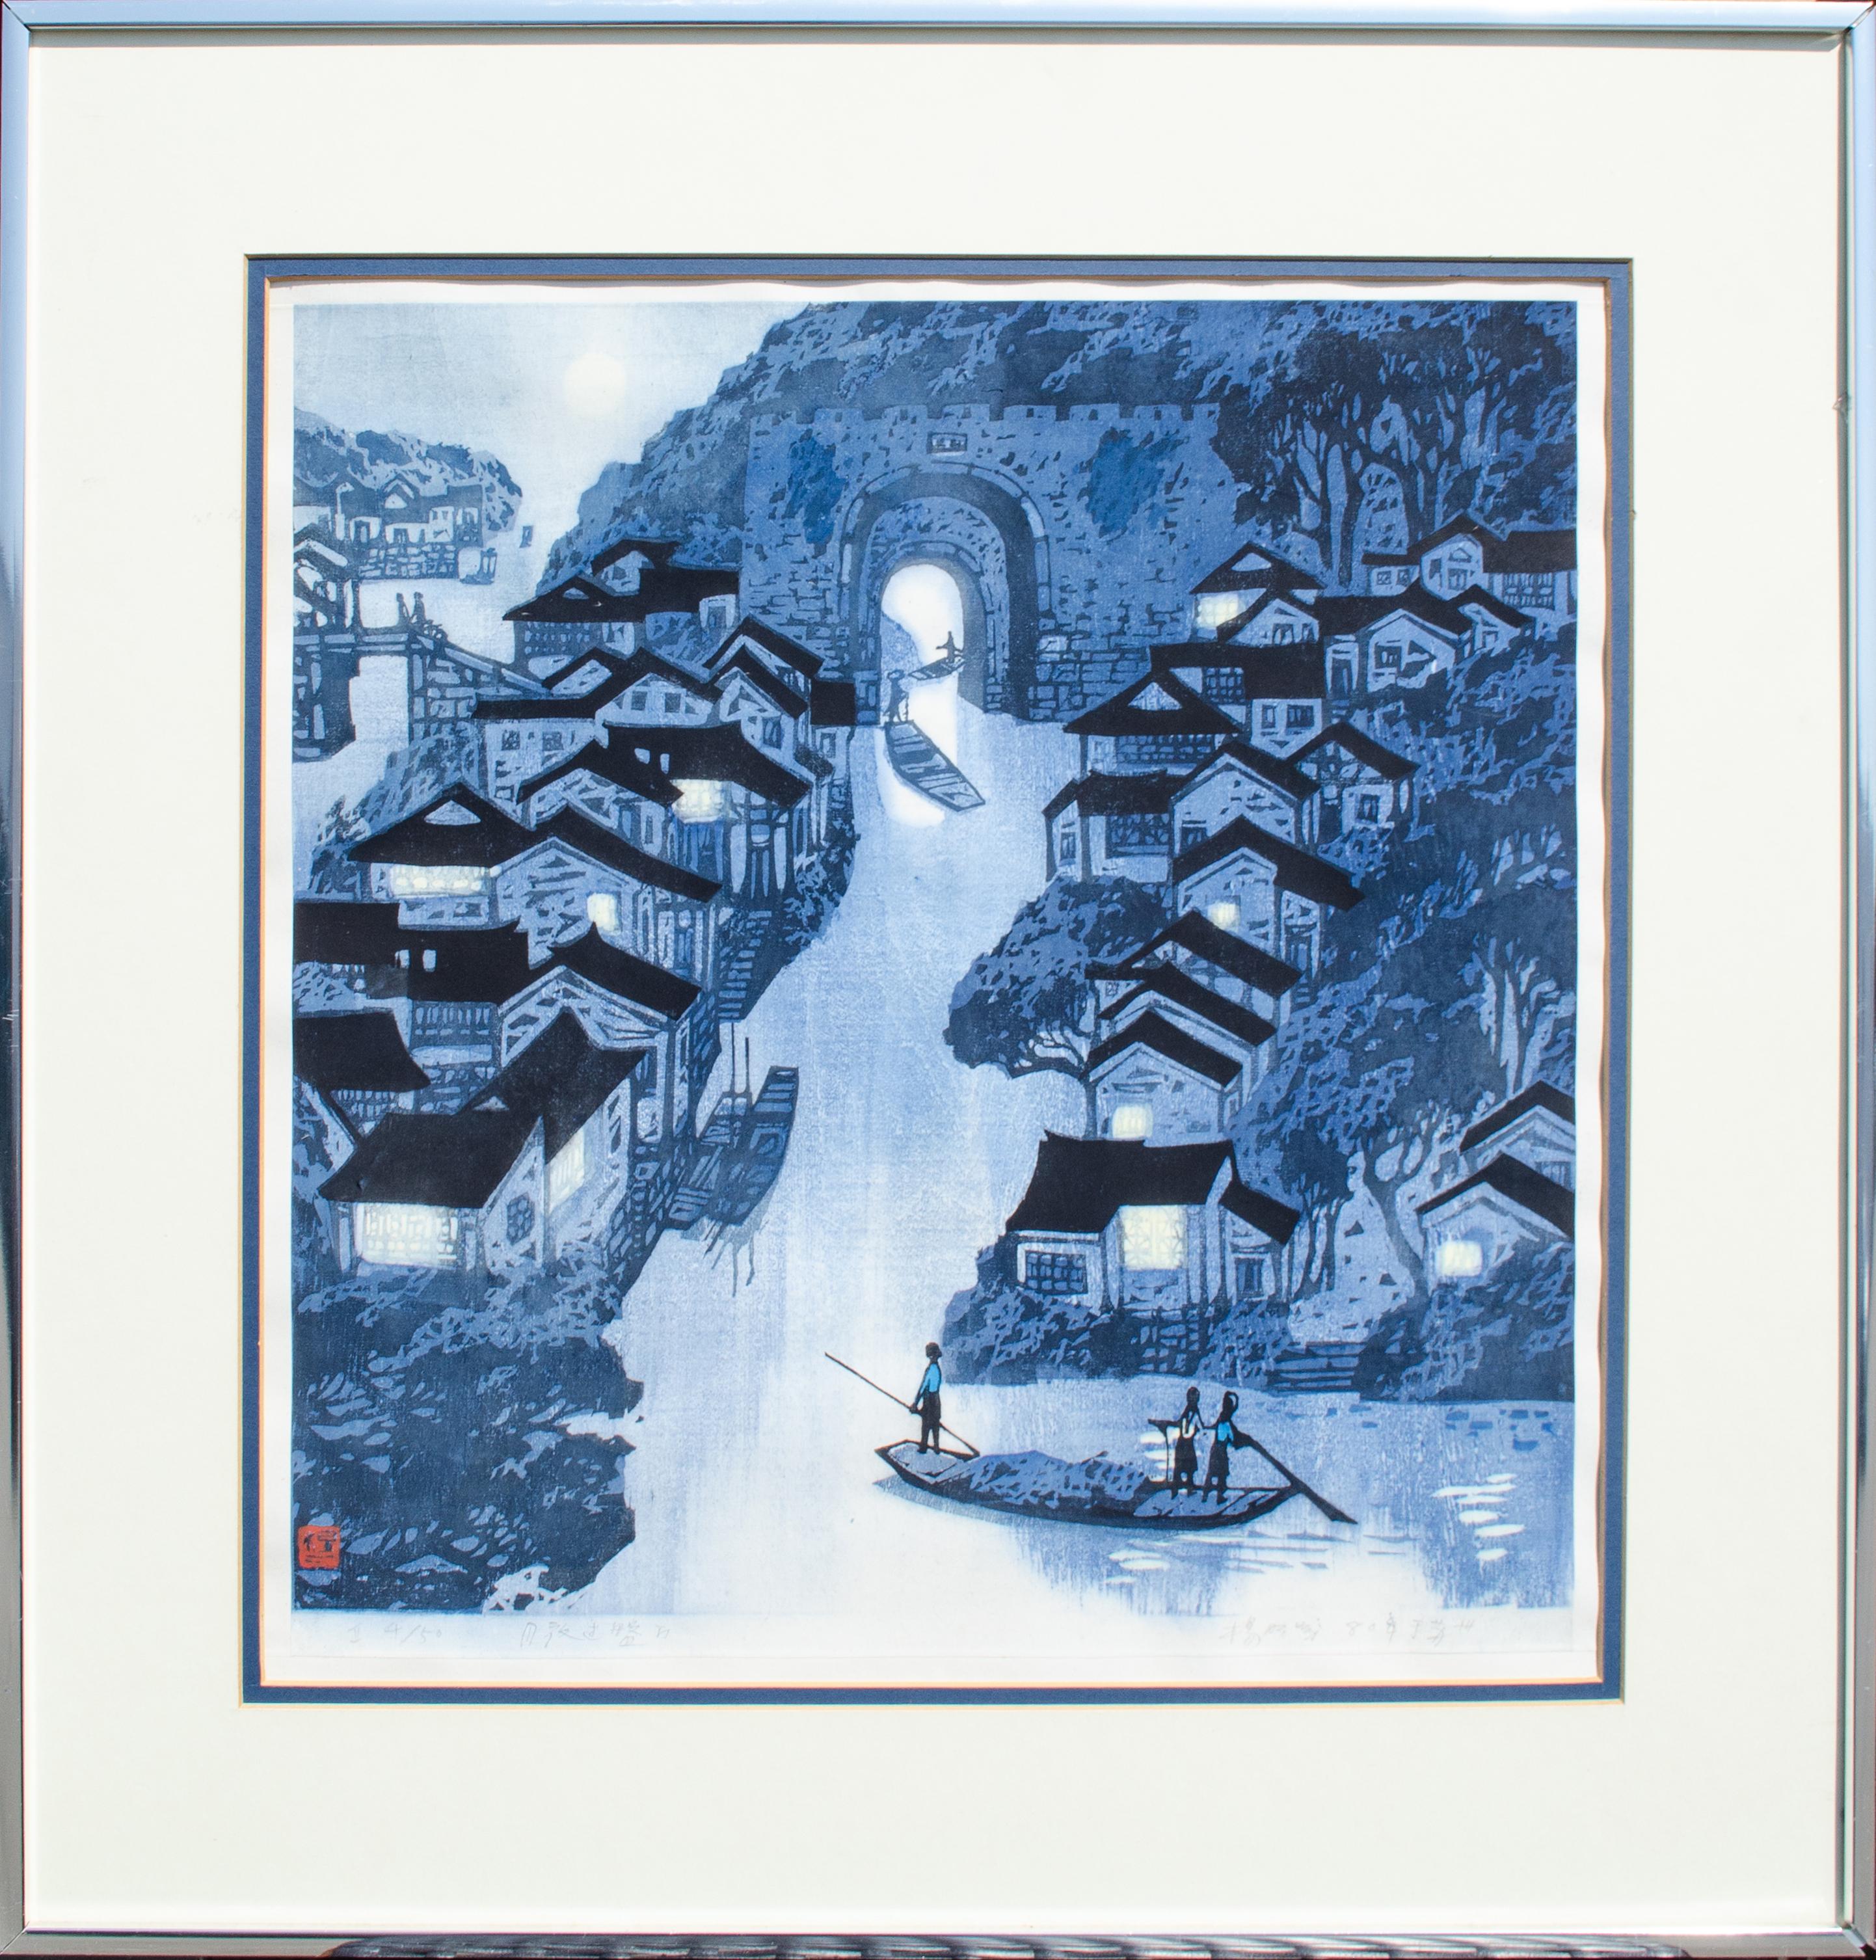 Yang Mingyi (Chinese, b. 1943)
Passing Through at Winding Gates by Moonlight, 1980
Lithograph
Sight: 19 1/4 x 16 5/8 in.
Framed: 22 5/8 x 22 1/4 x 3/4 in.
Signed, dated, inscribed, and numbered 4/50 on bottom

Yang Mingyi was born in 1943 in Suzhou.